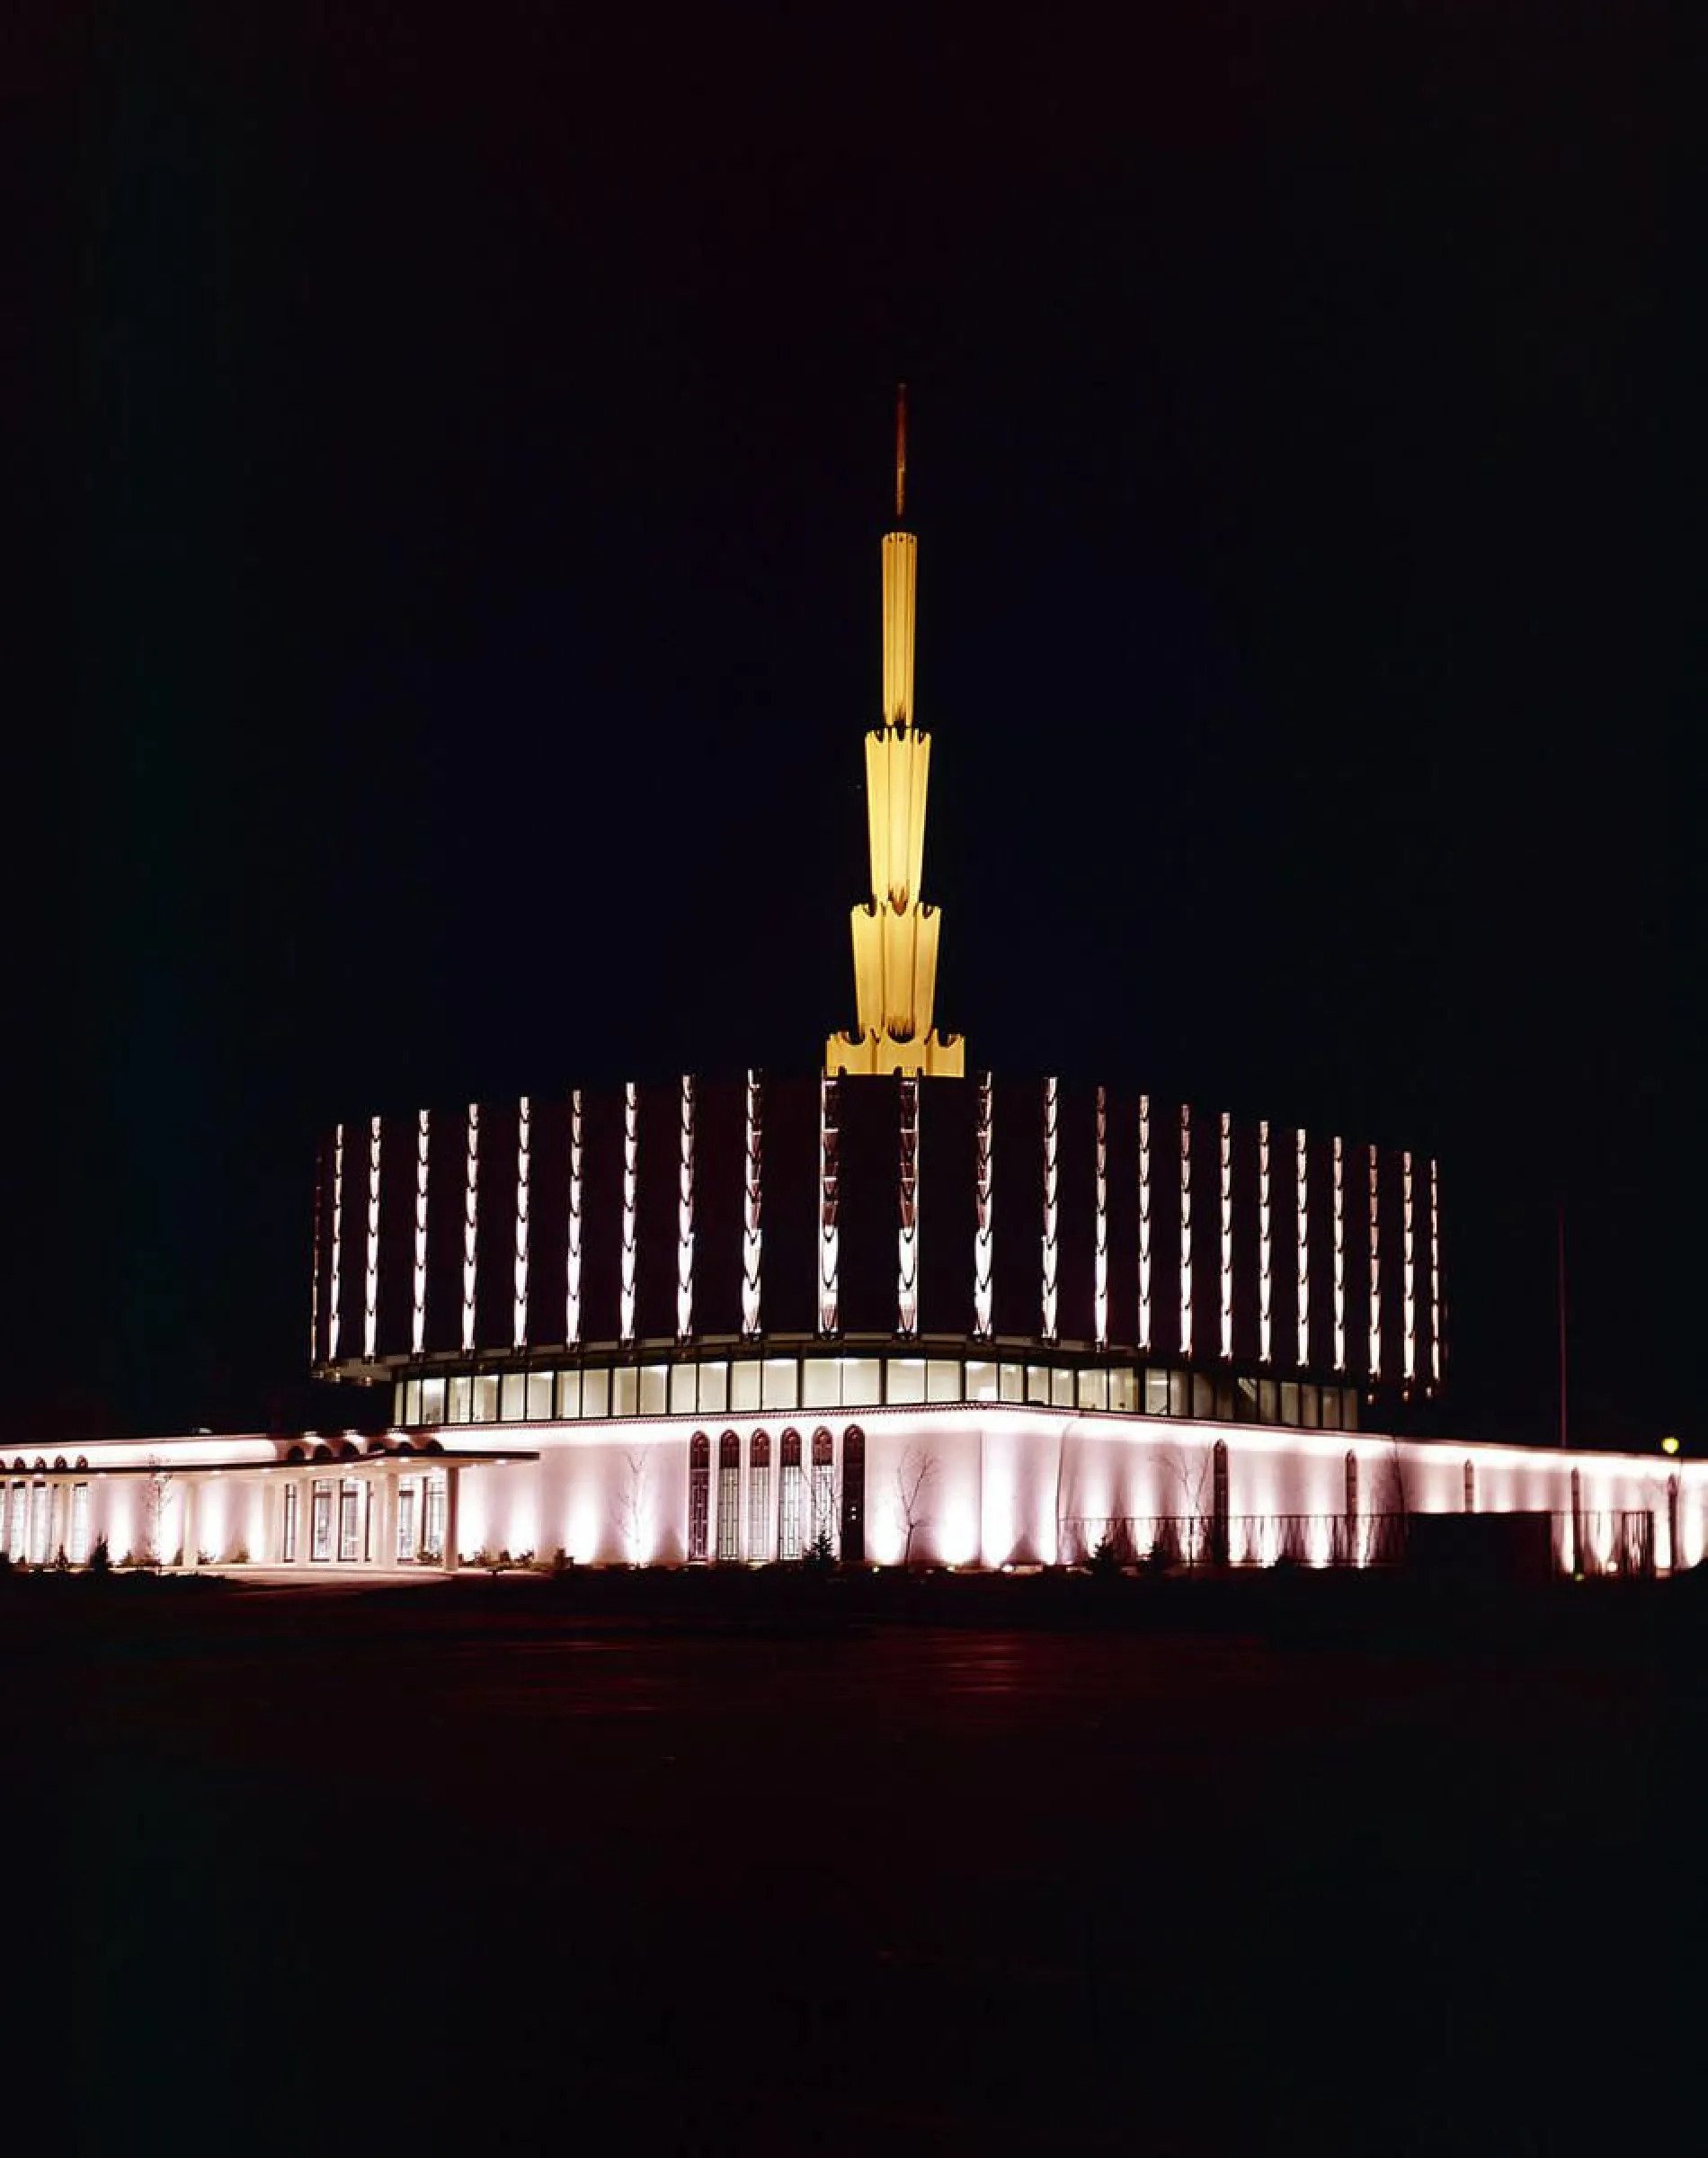 A nighttime view of the original Ogden Utah Temple, dedicated in 1972, that had a flat, round base with a spire in the center.